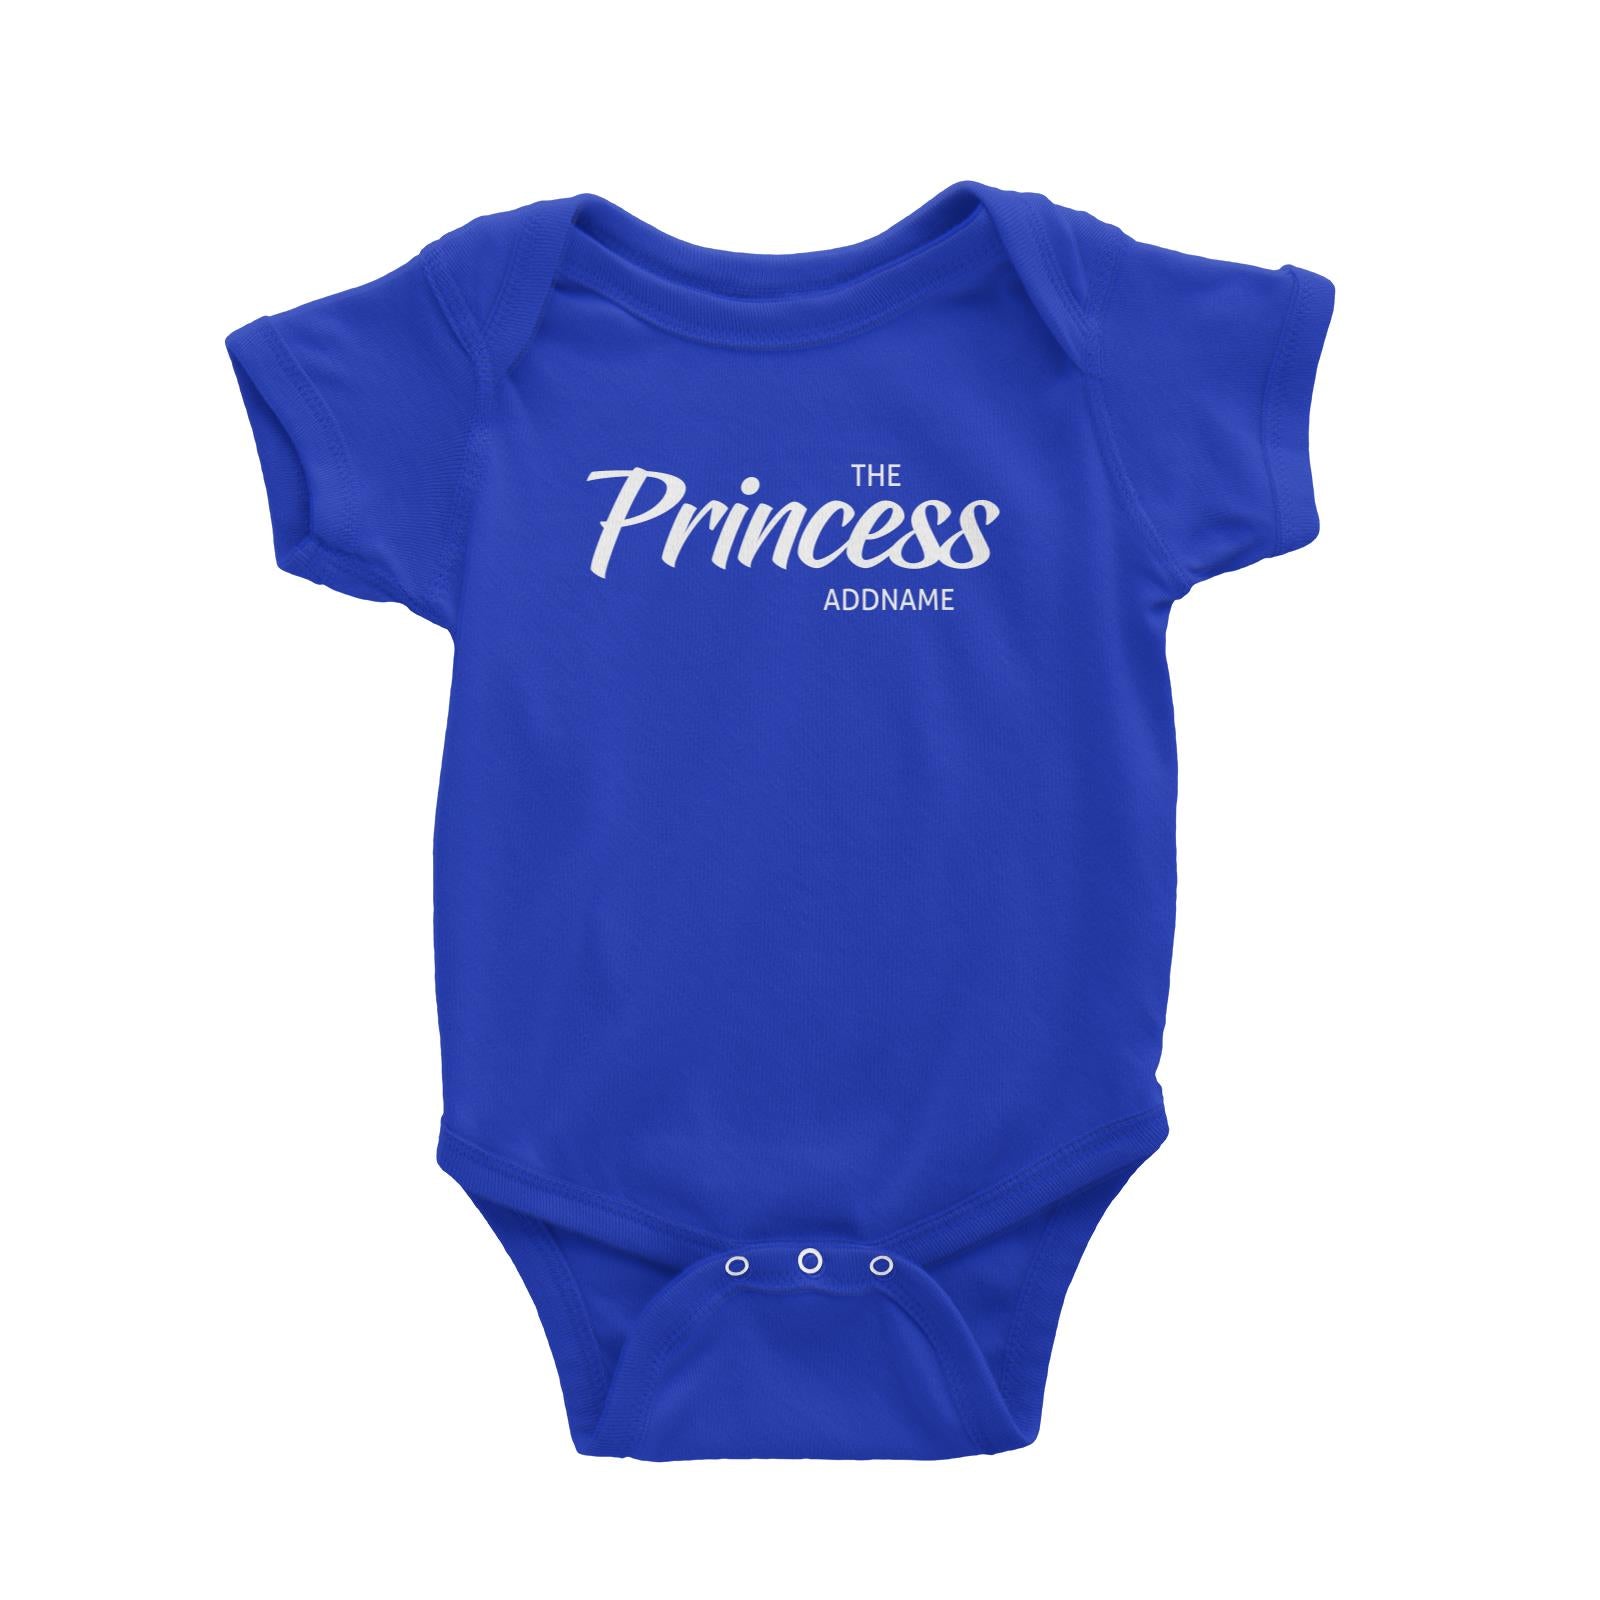 The Princess Addname Baby Romper Personalizable Designs Matching Family Royal Family Edition Royal Simple